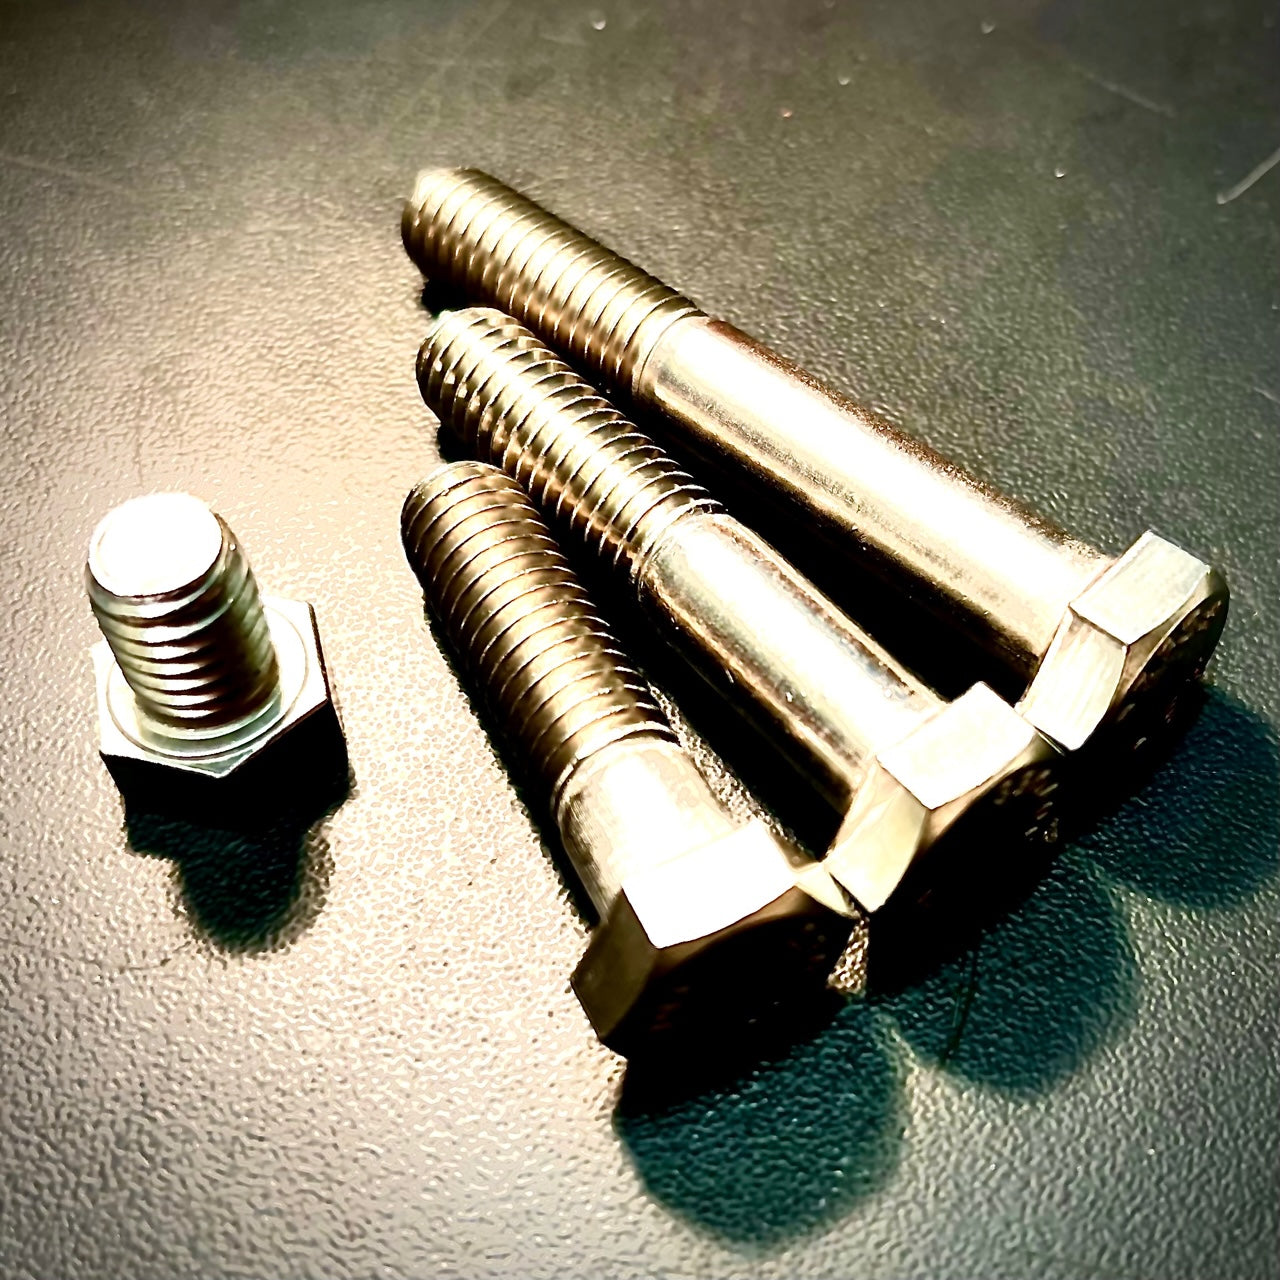 UNC 5/16"Hex Bolt and Set Screws A2 304 Stainless Steel DIN931 - Fixaball Ltd. Fixings and Fasteners UK